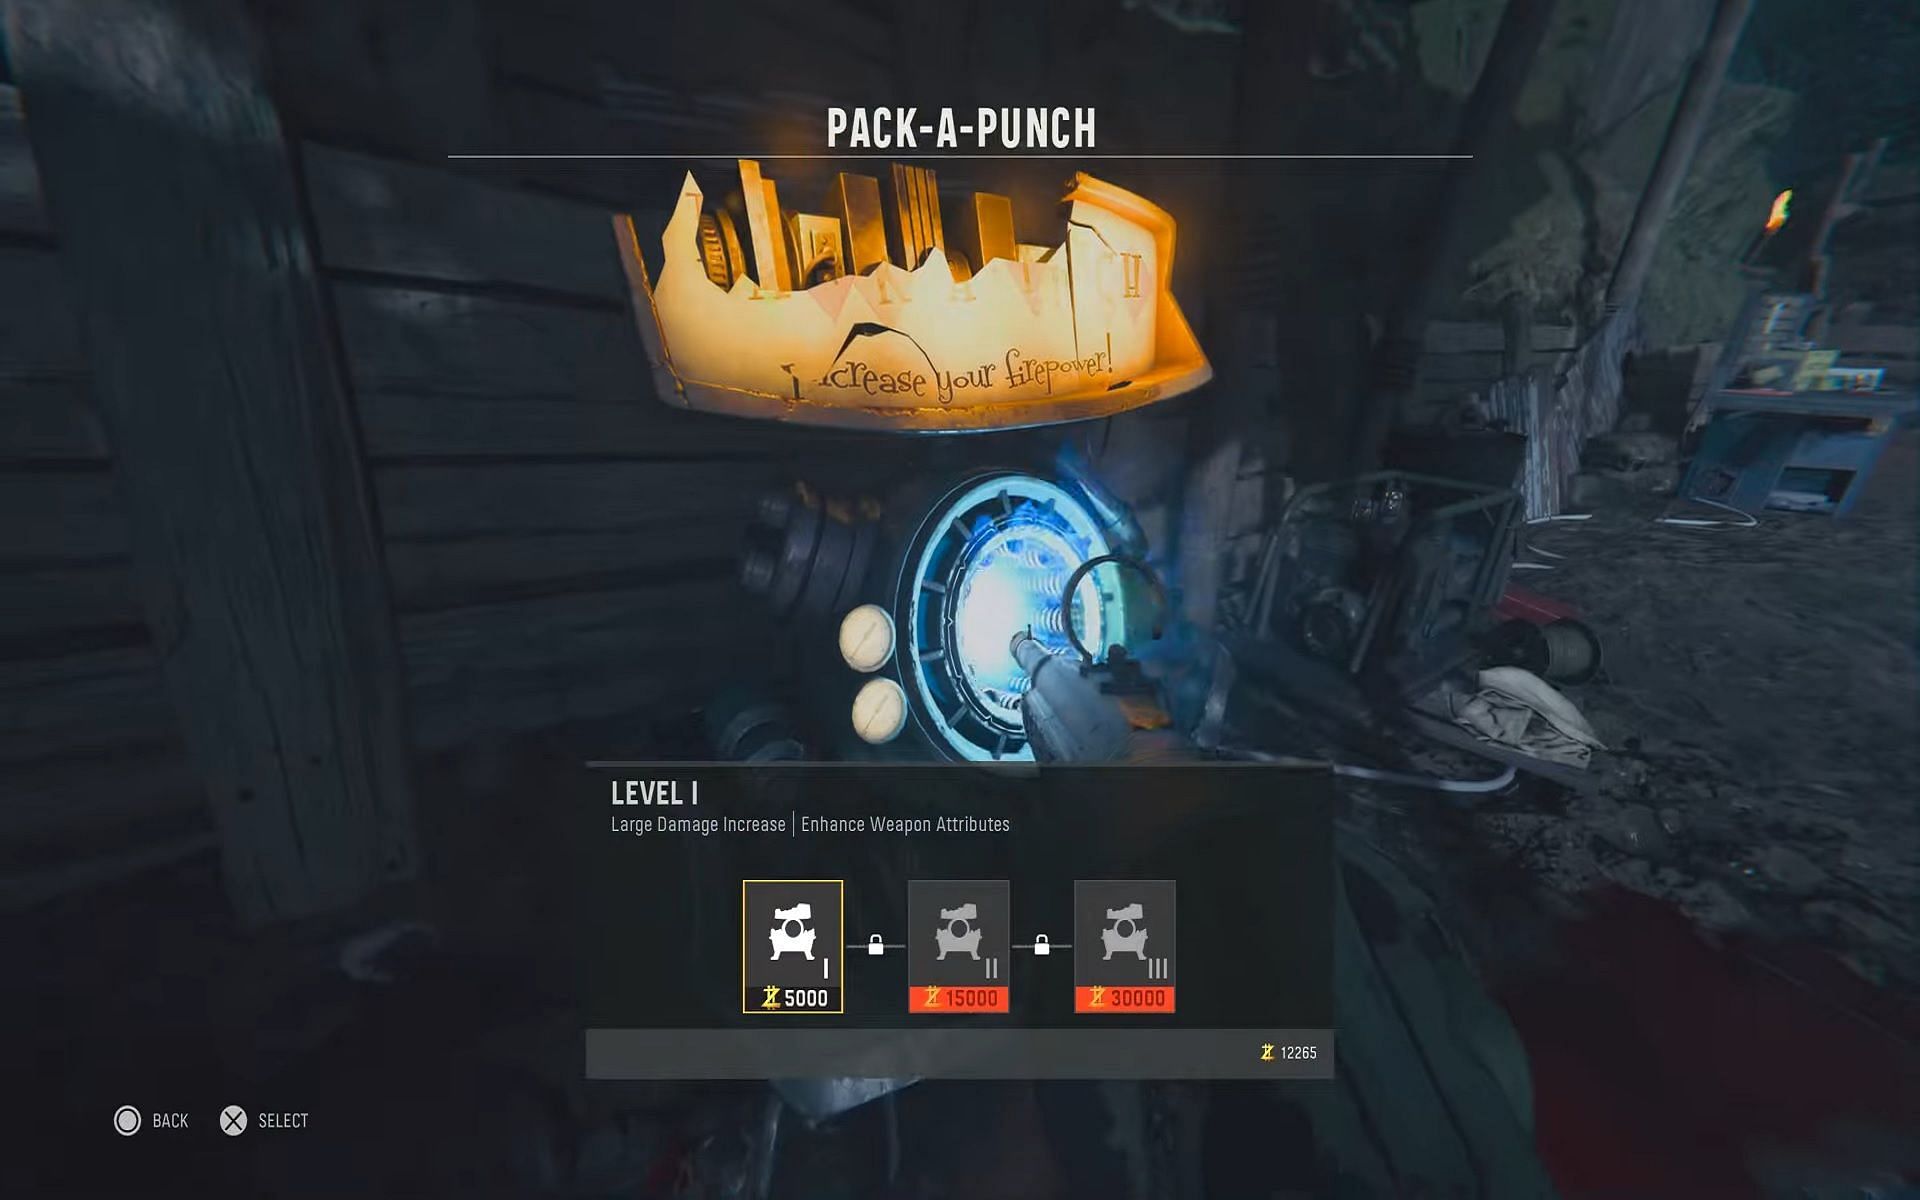 The Pack-A-Punch menu in-game (Image via TheGamingRevolution)